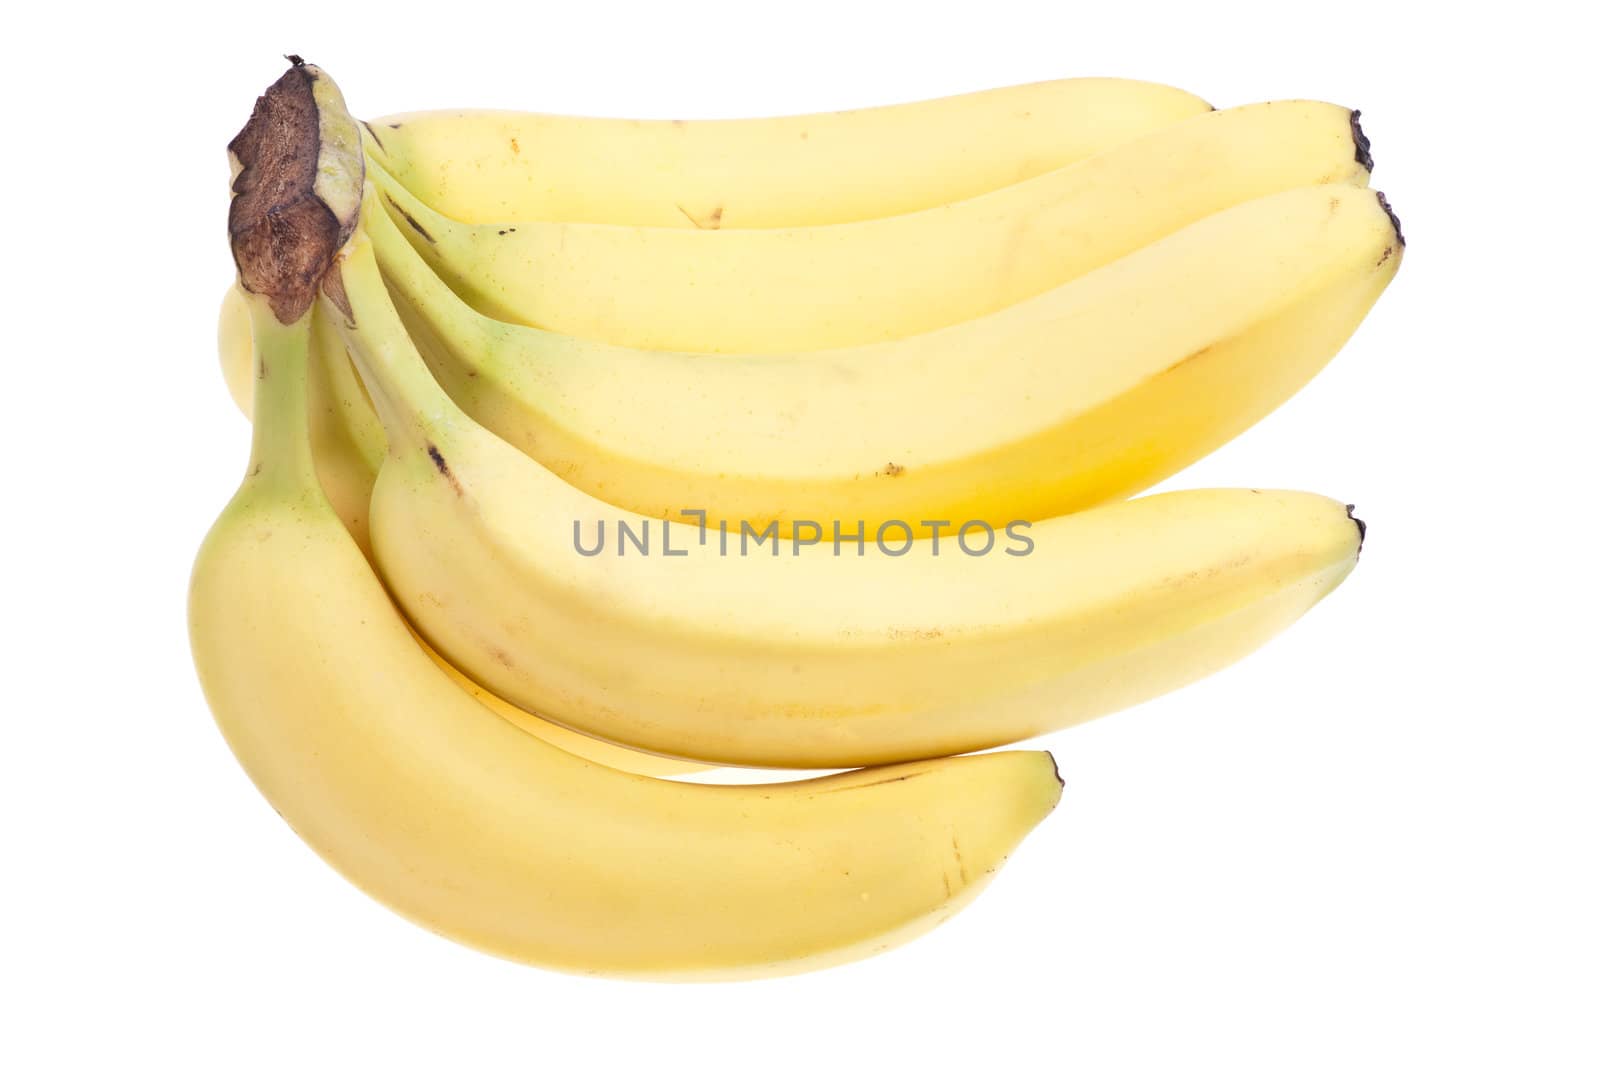 Bunch of fresh bananas the image on white background